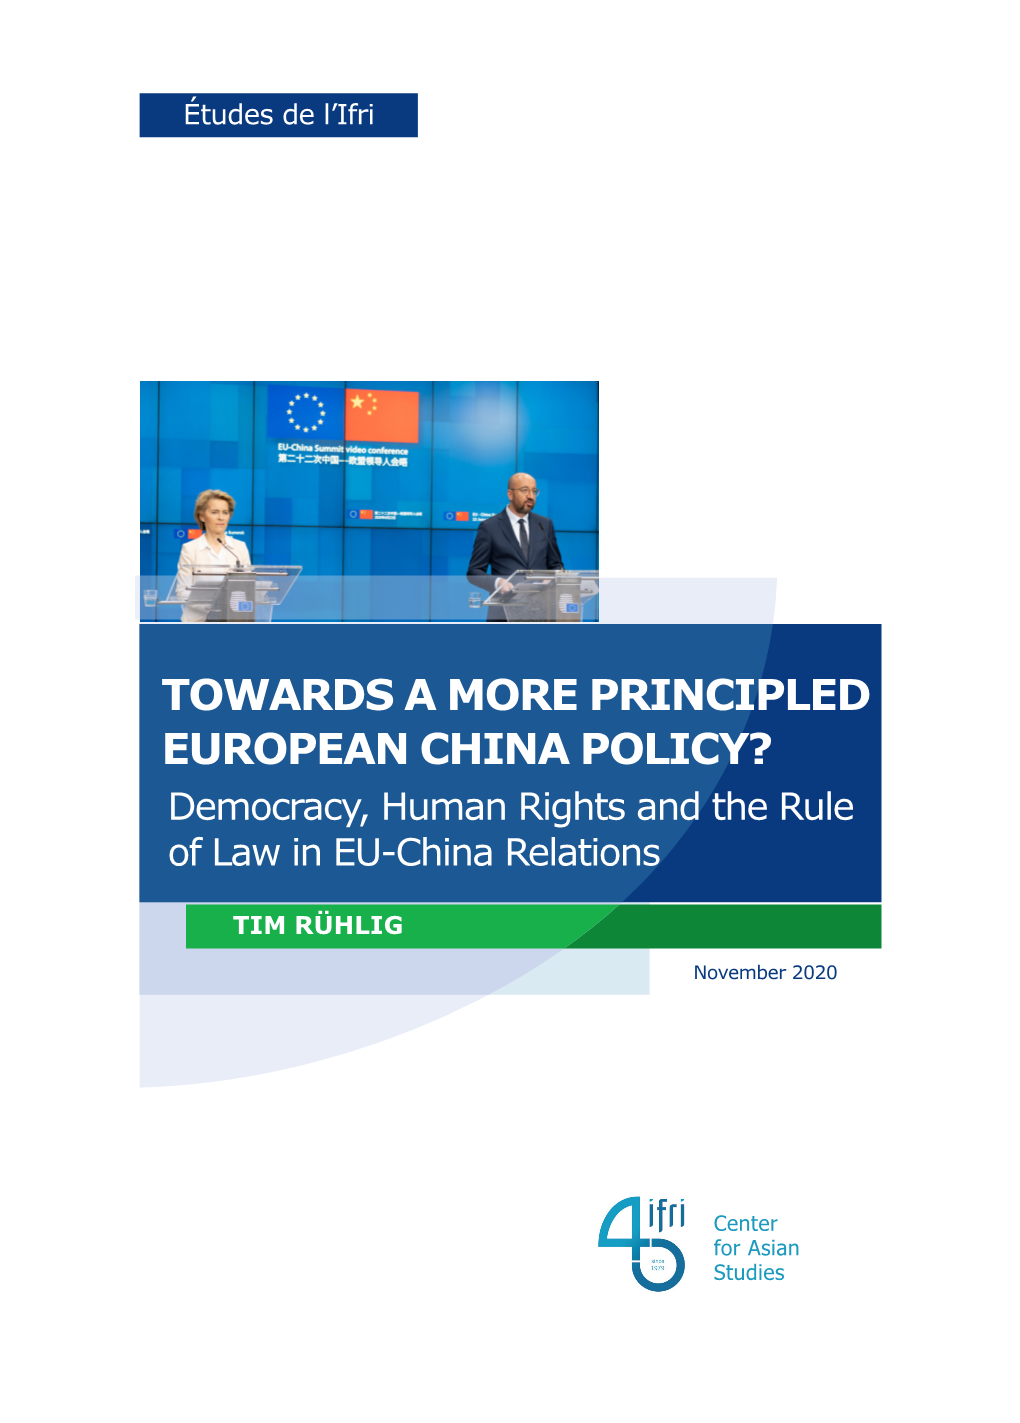 TOWARDS a MORE PRINCIPLED EUROPEAN CHINA POLICY? Democracy, Human Rights and the Rule of Law in EU-China Relations